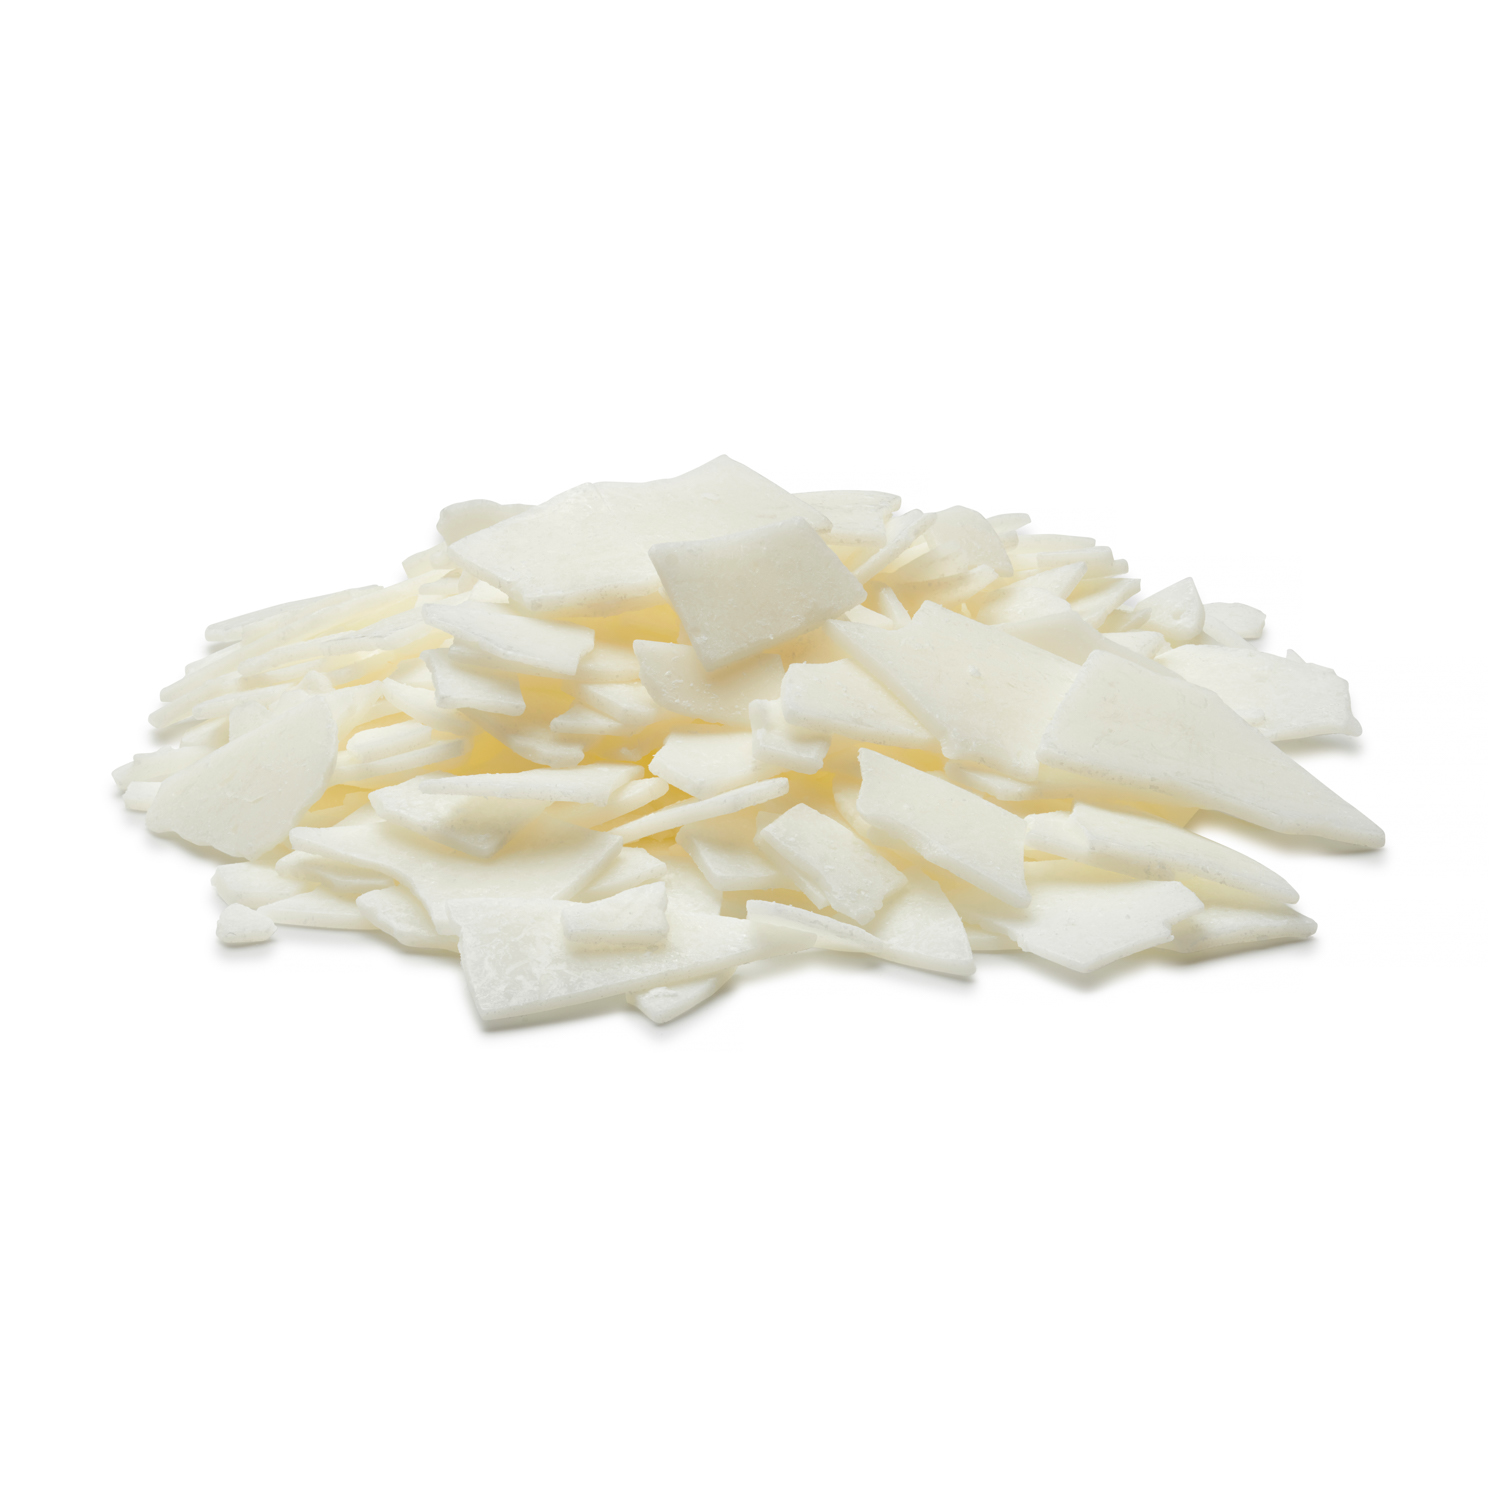 Flakes of NatureWax C3 Soy Wax for Container Candles